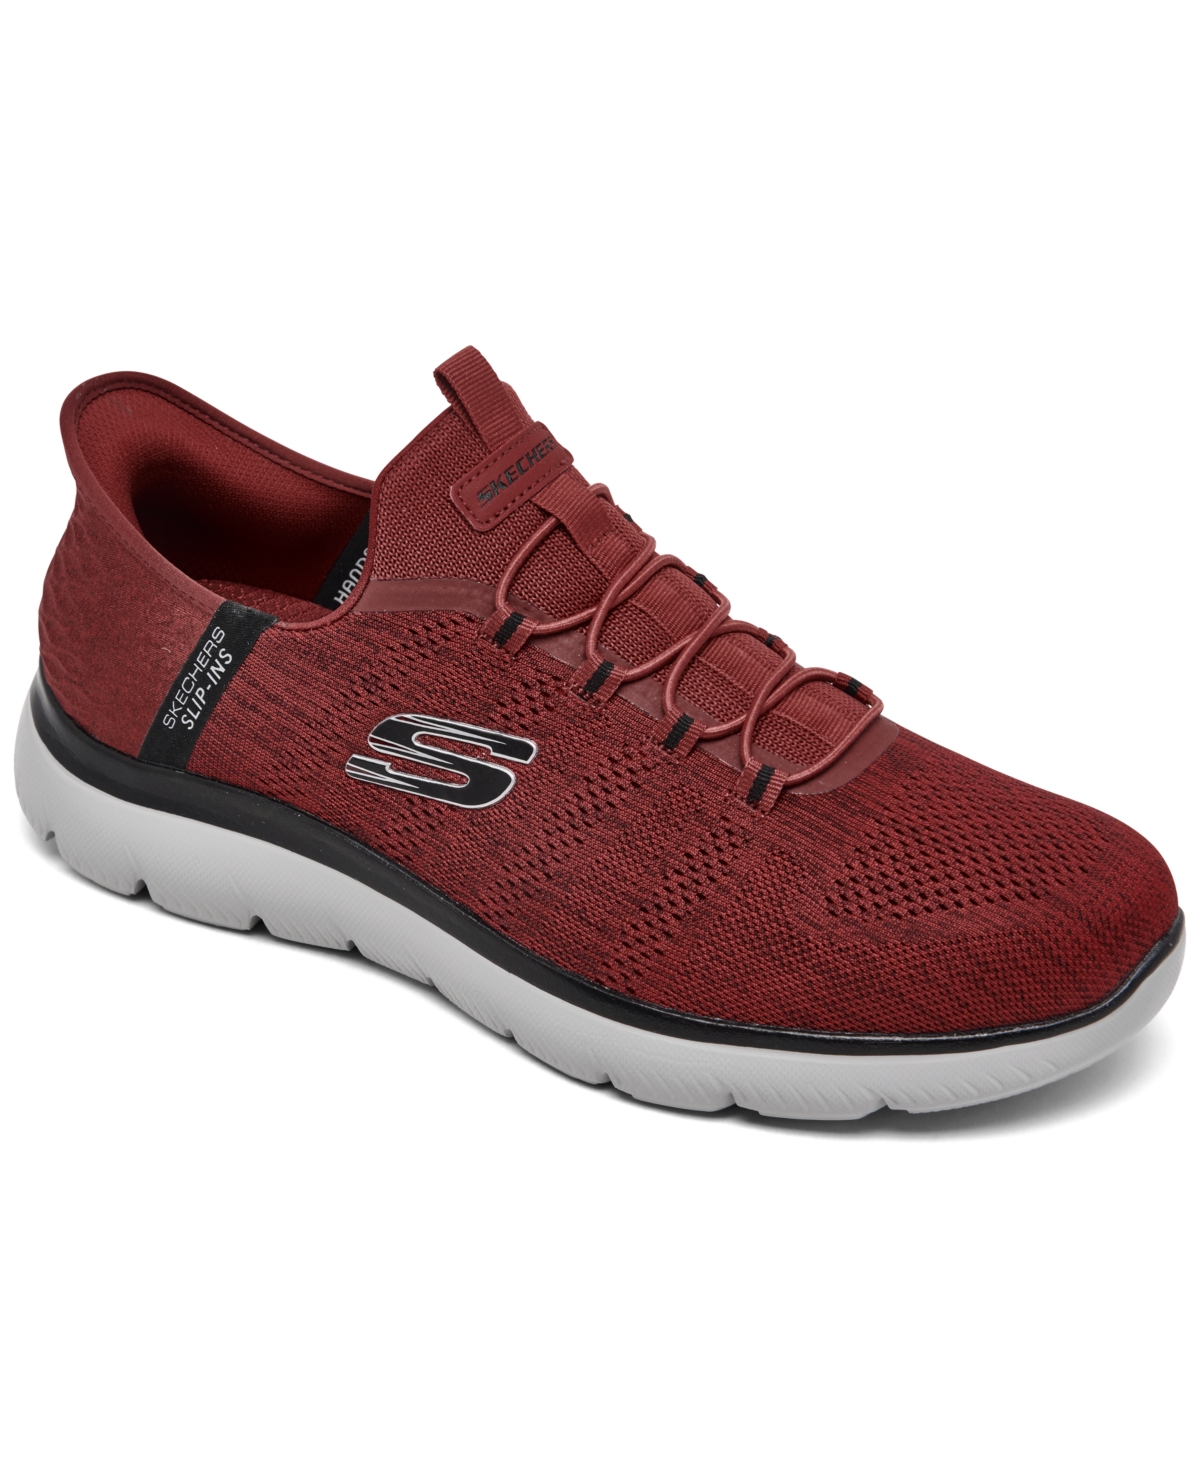 Men's Slip-Ins: Summits - Key Pace Walking Sneakers from Finish Line - Red/Black